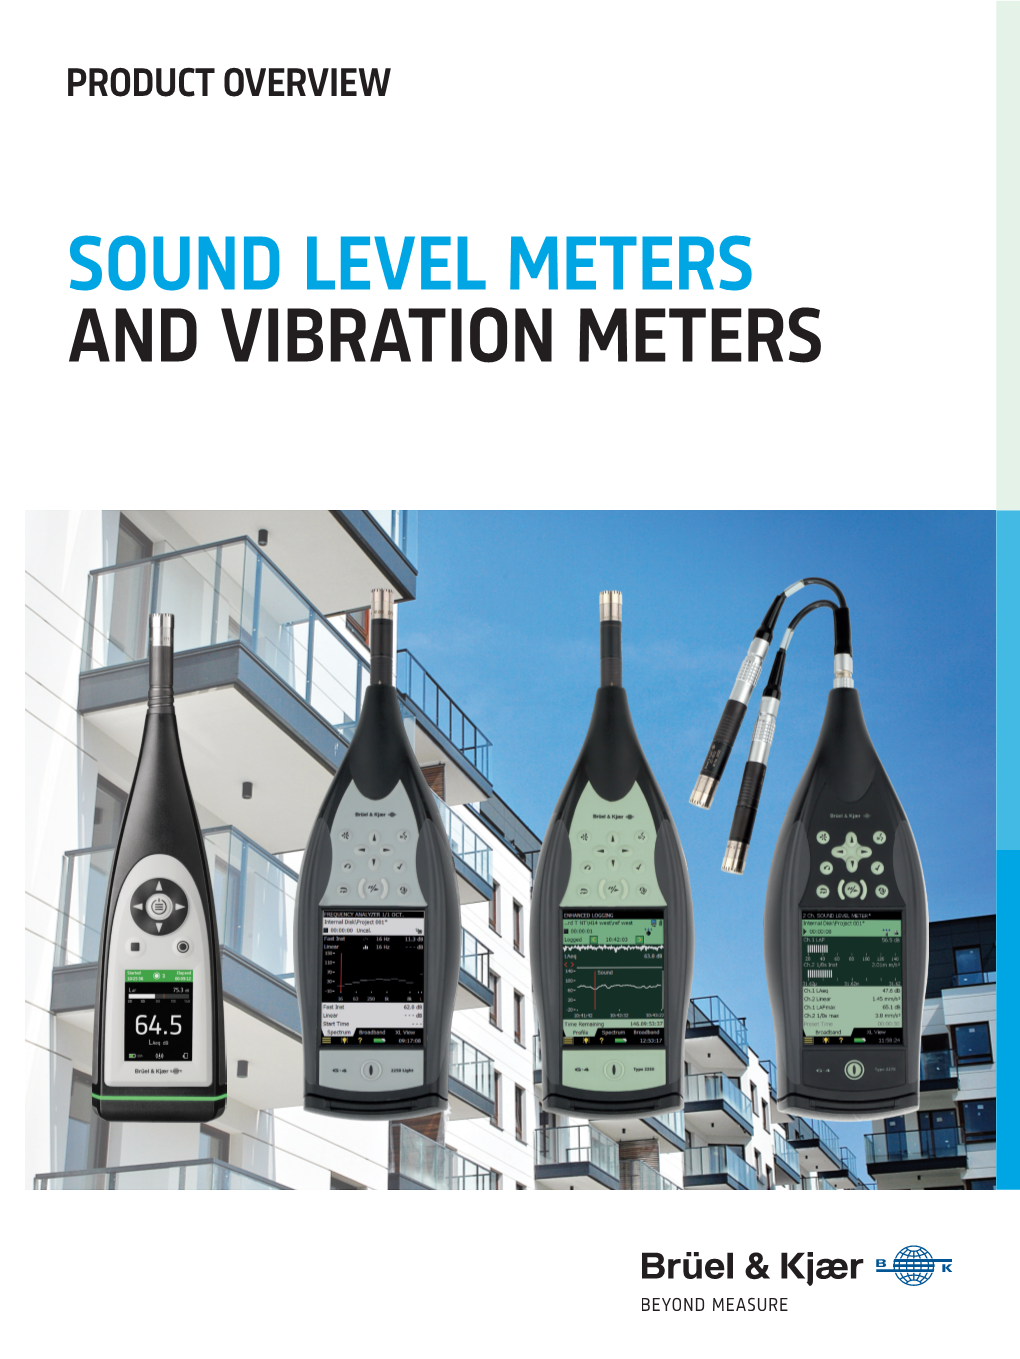 Sound Level Meters and Vibration Meters Introduction